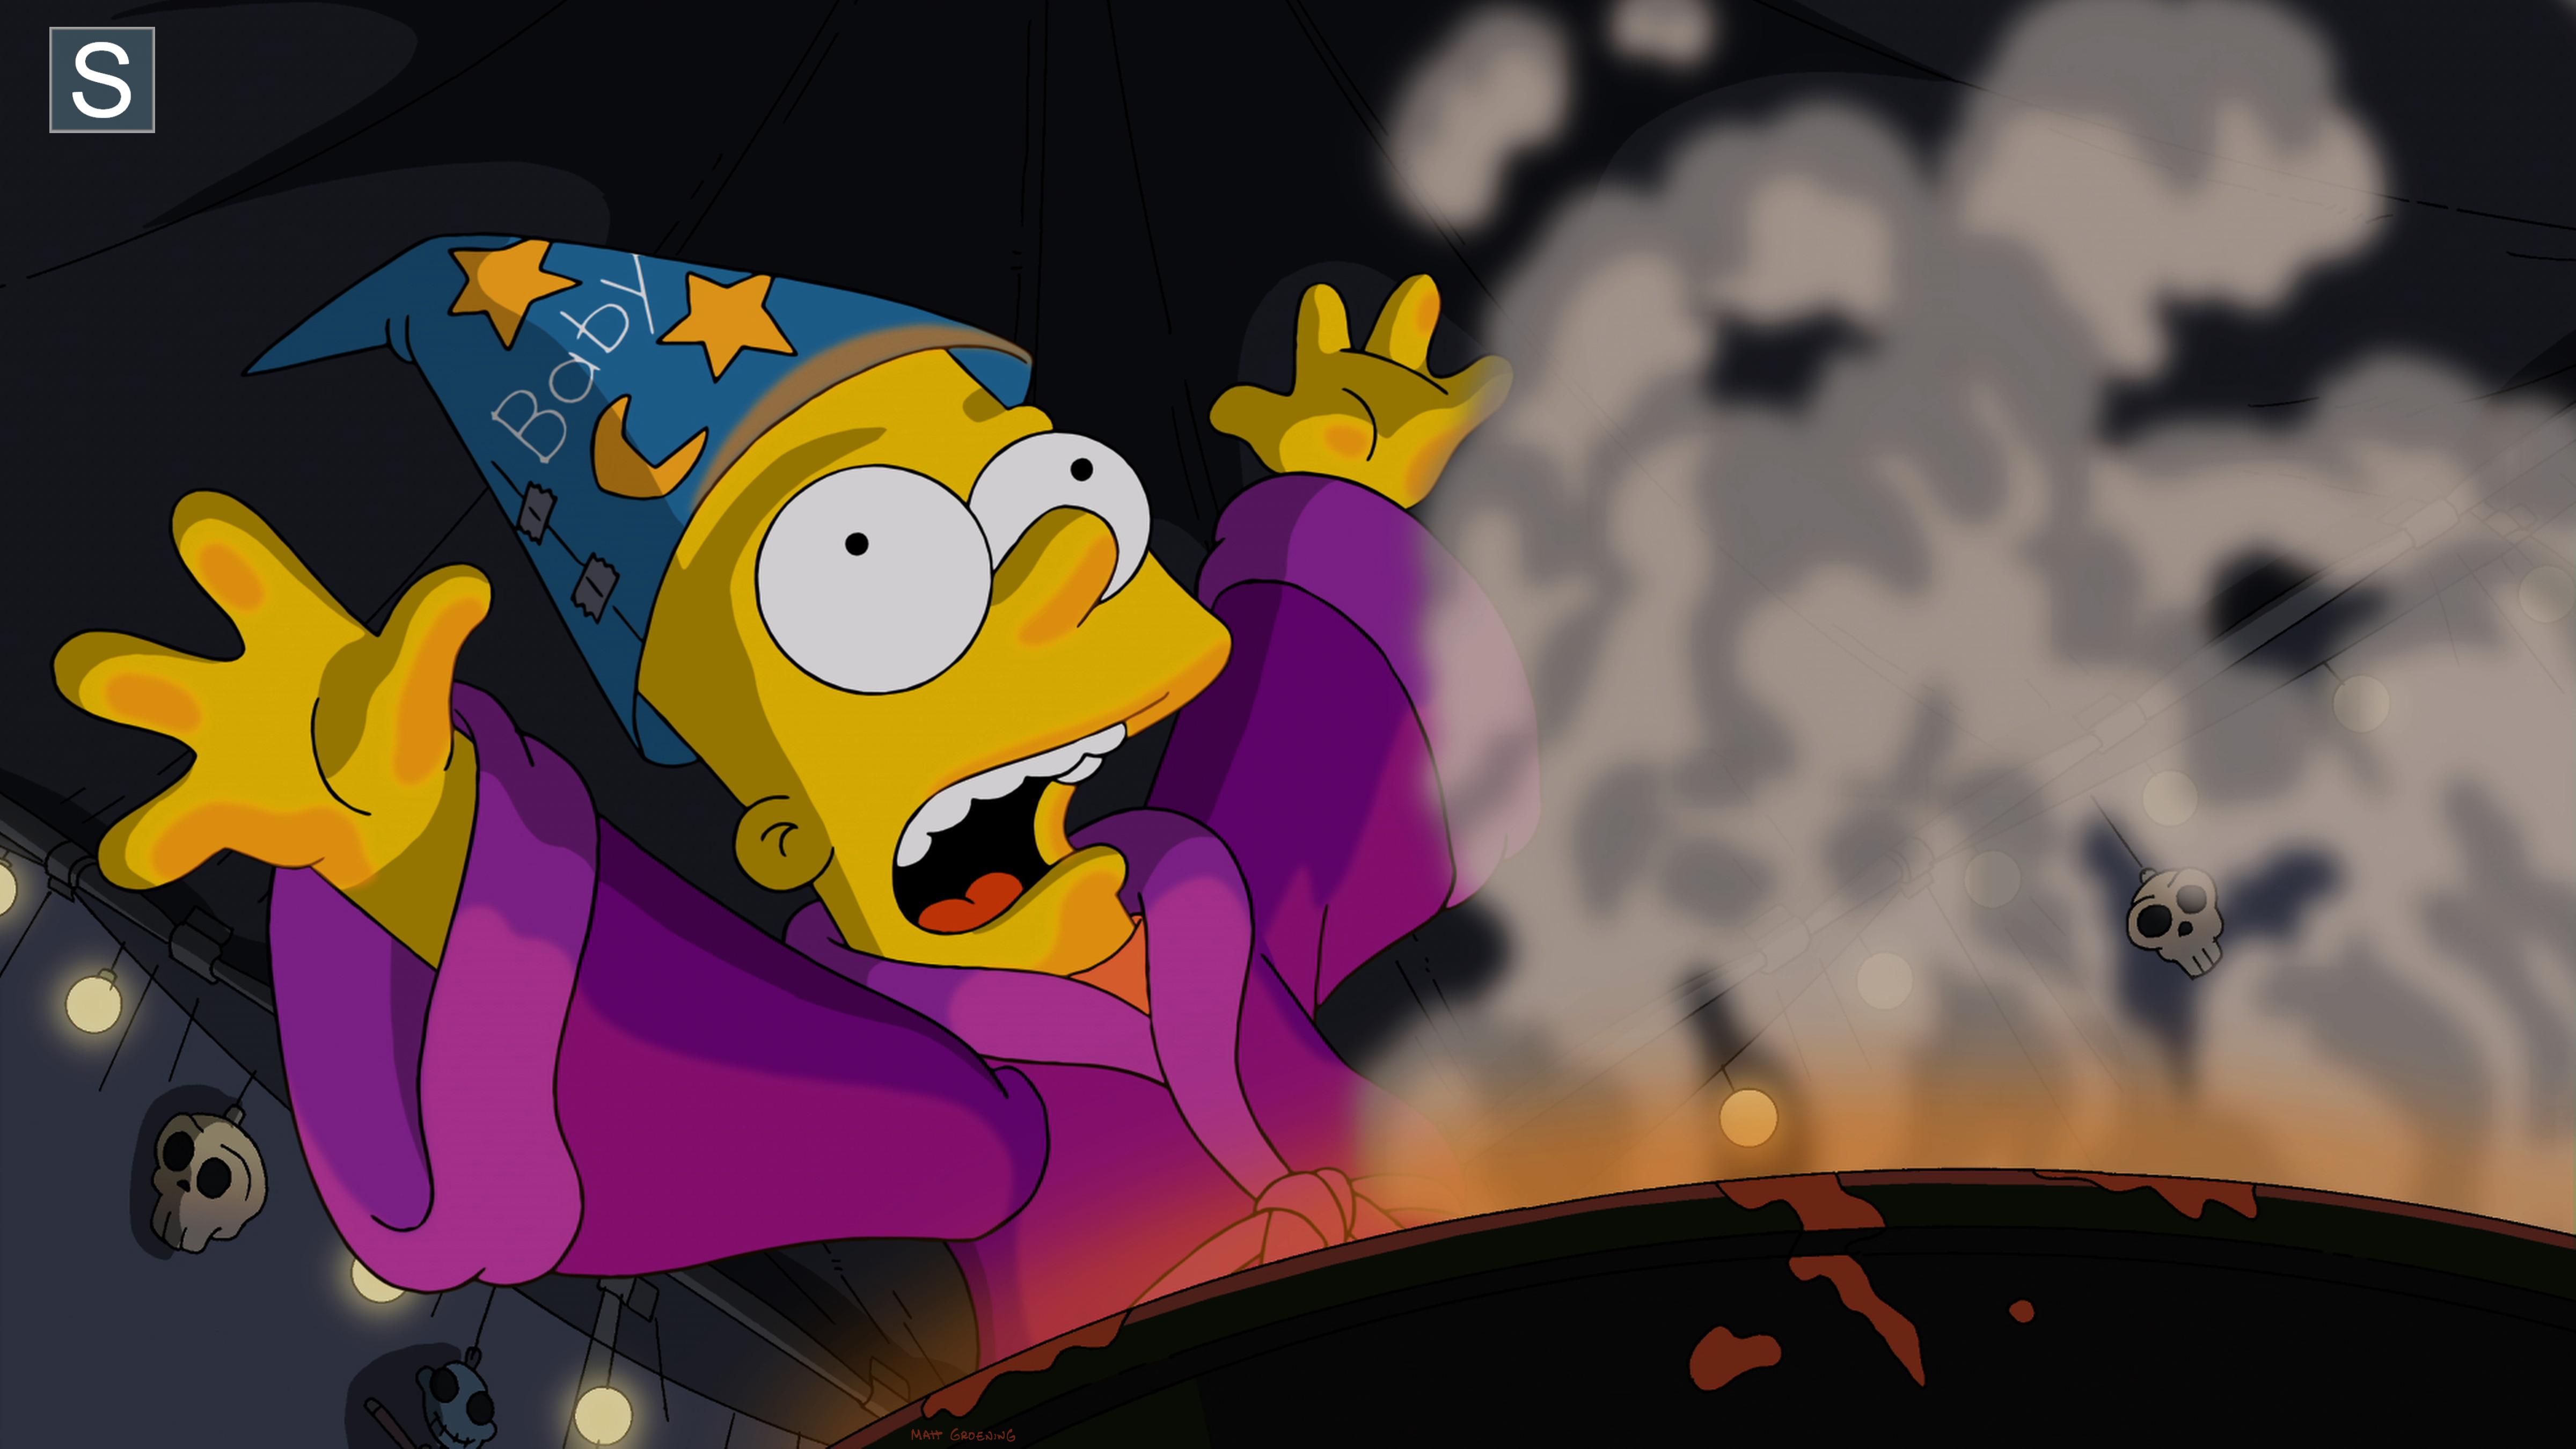 thuis engel Omhoog gaan What to Expect When Bart's Expecting | Simpsons Wiki | Fandom